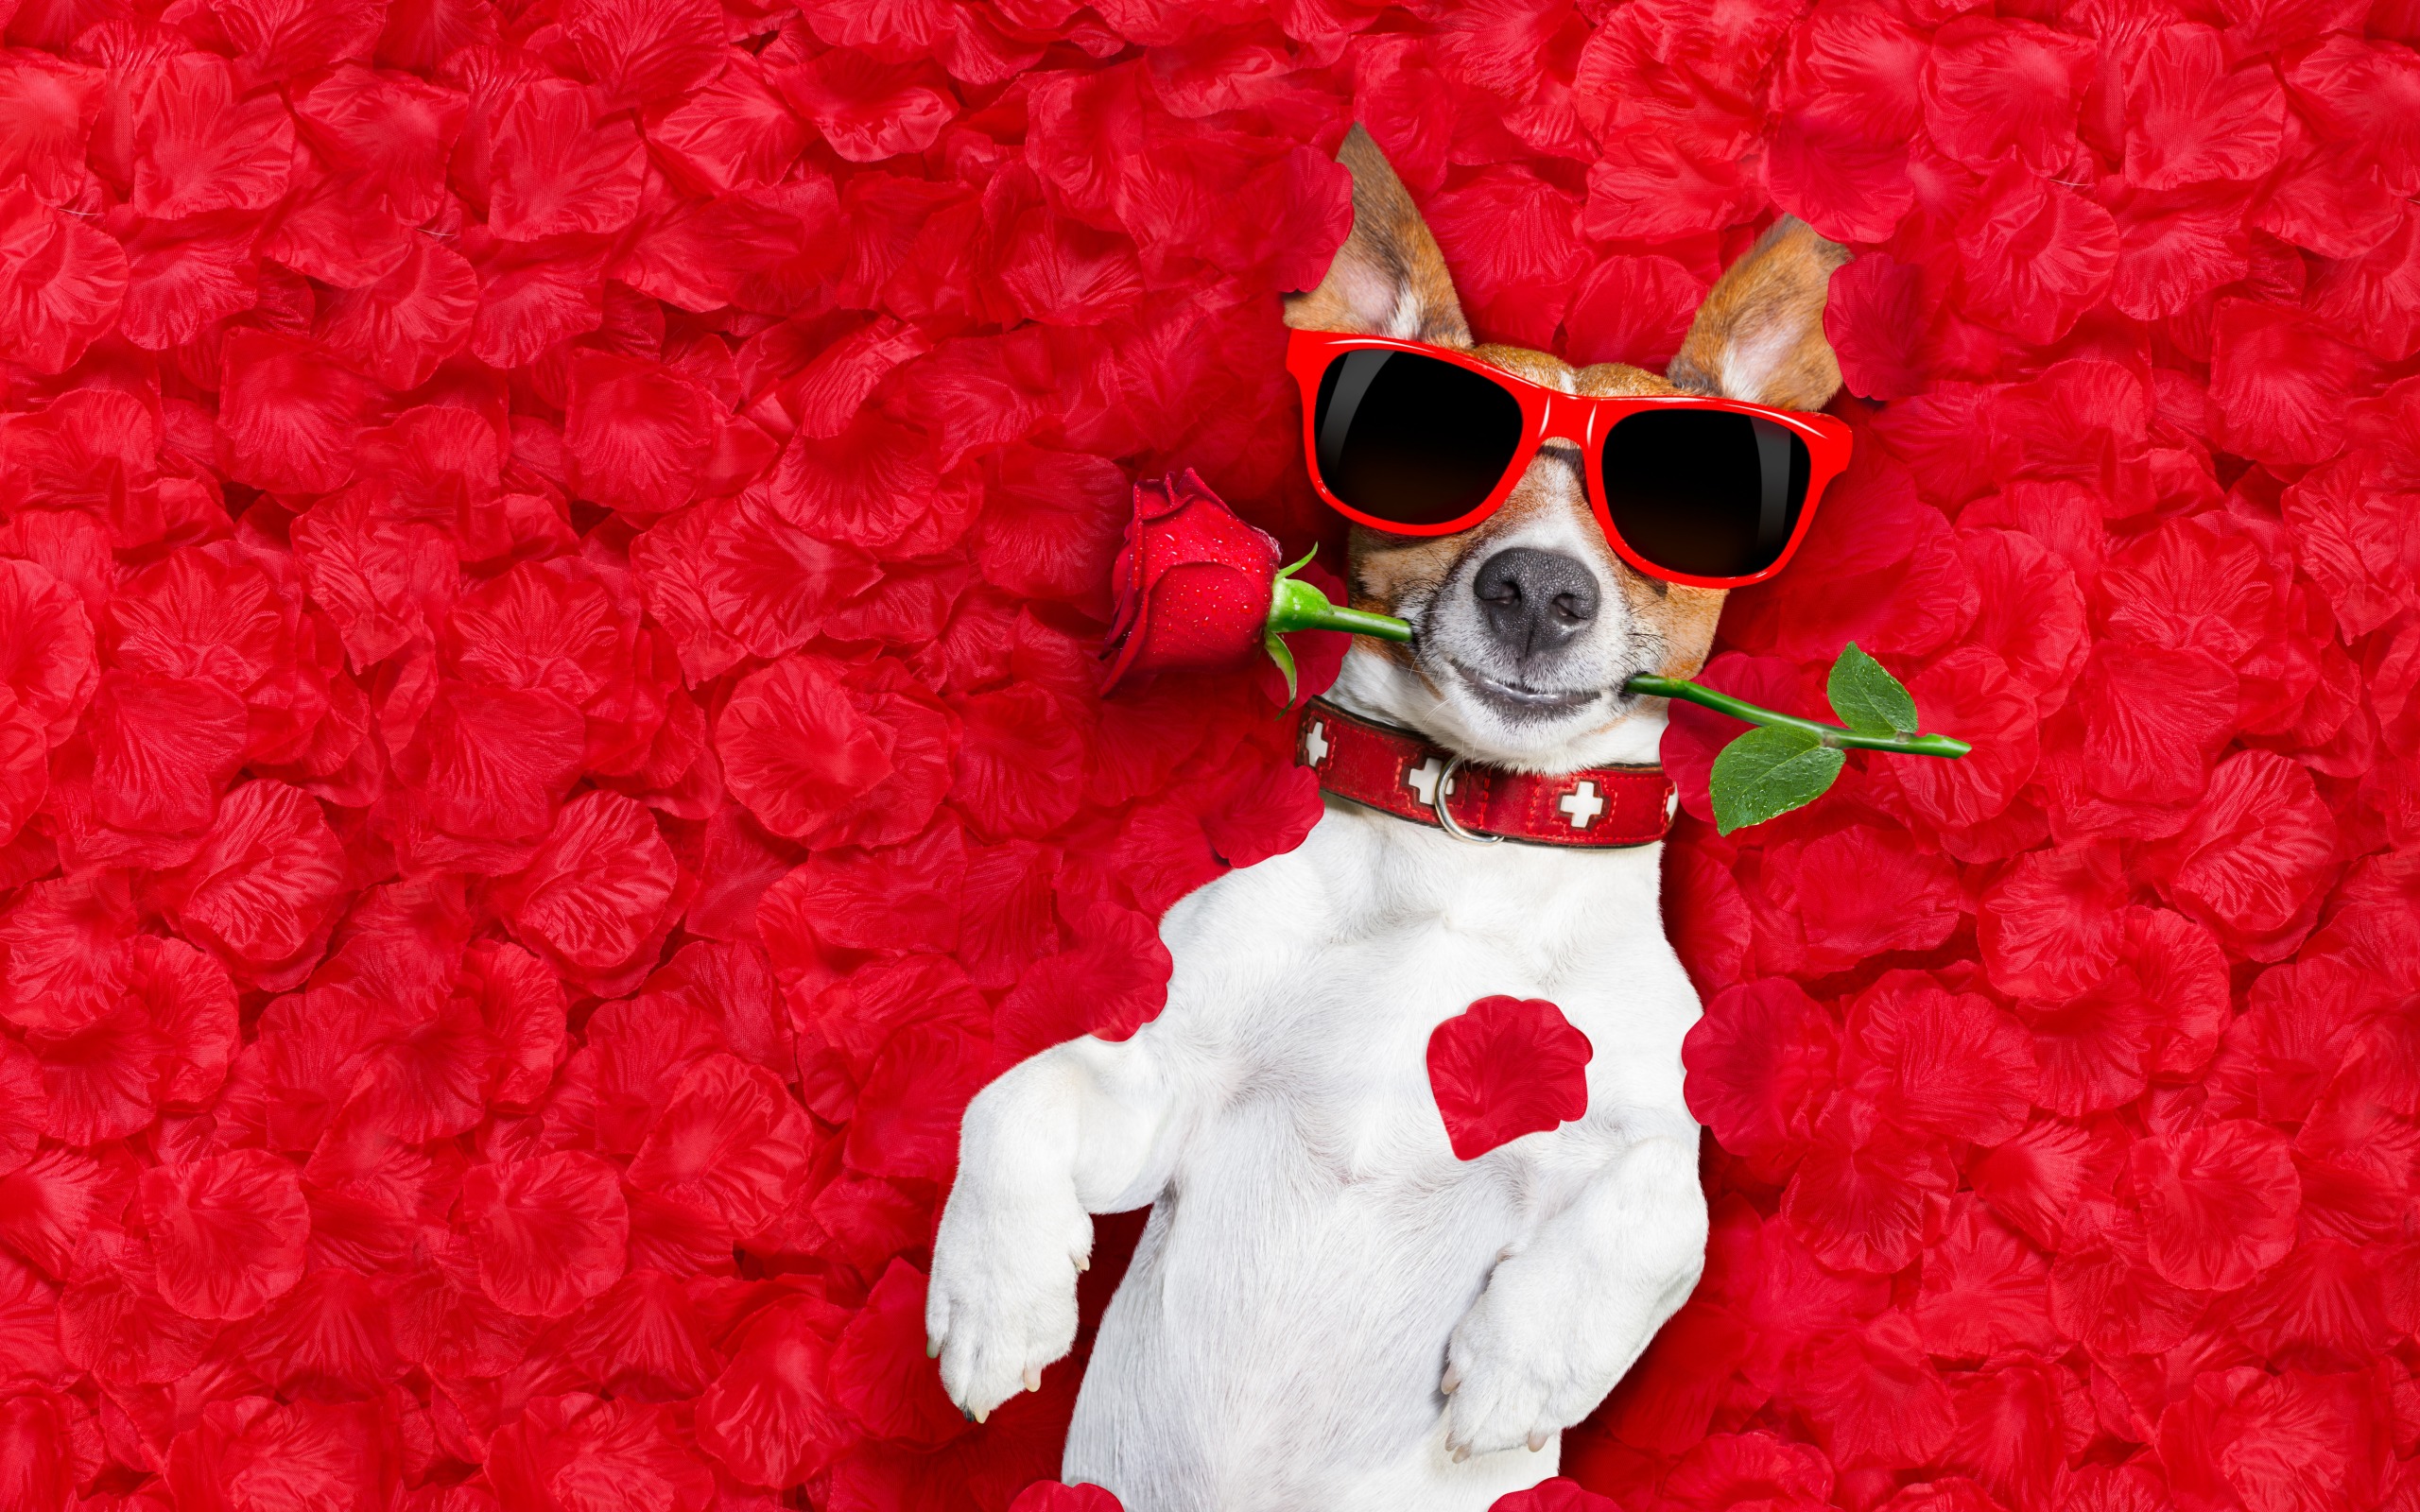 animal, jack russell terrier, dog, humor, petal, red rose, sunglasses, dogs